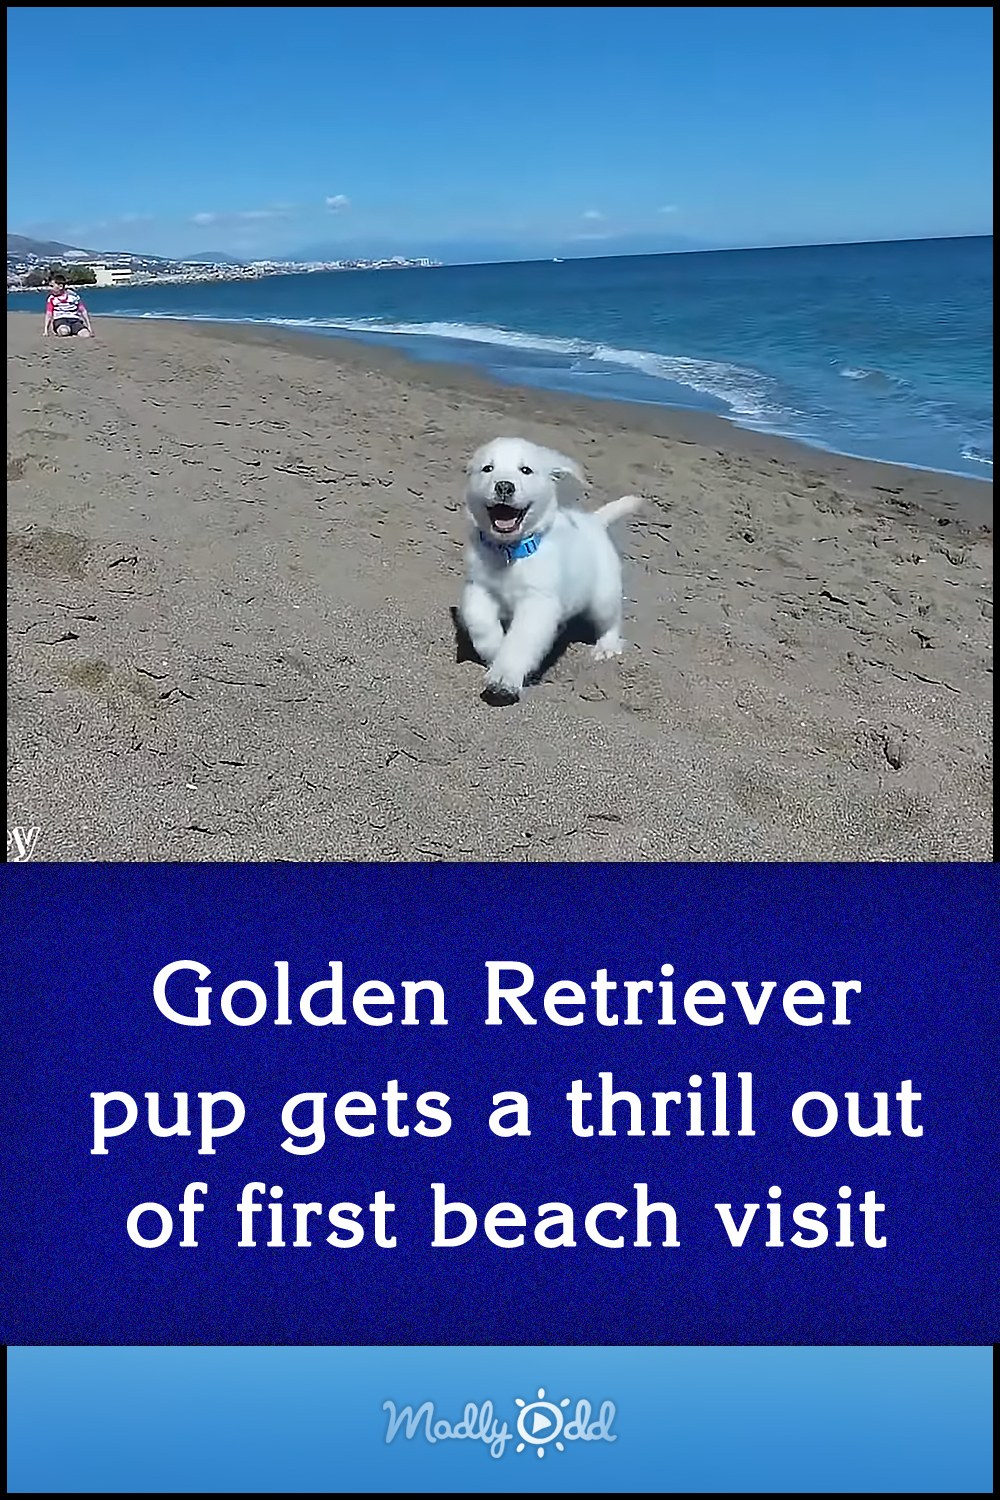 Golden Retriever pup gets a thrill out of first beach visit